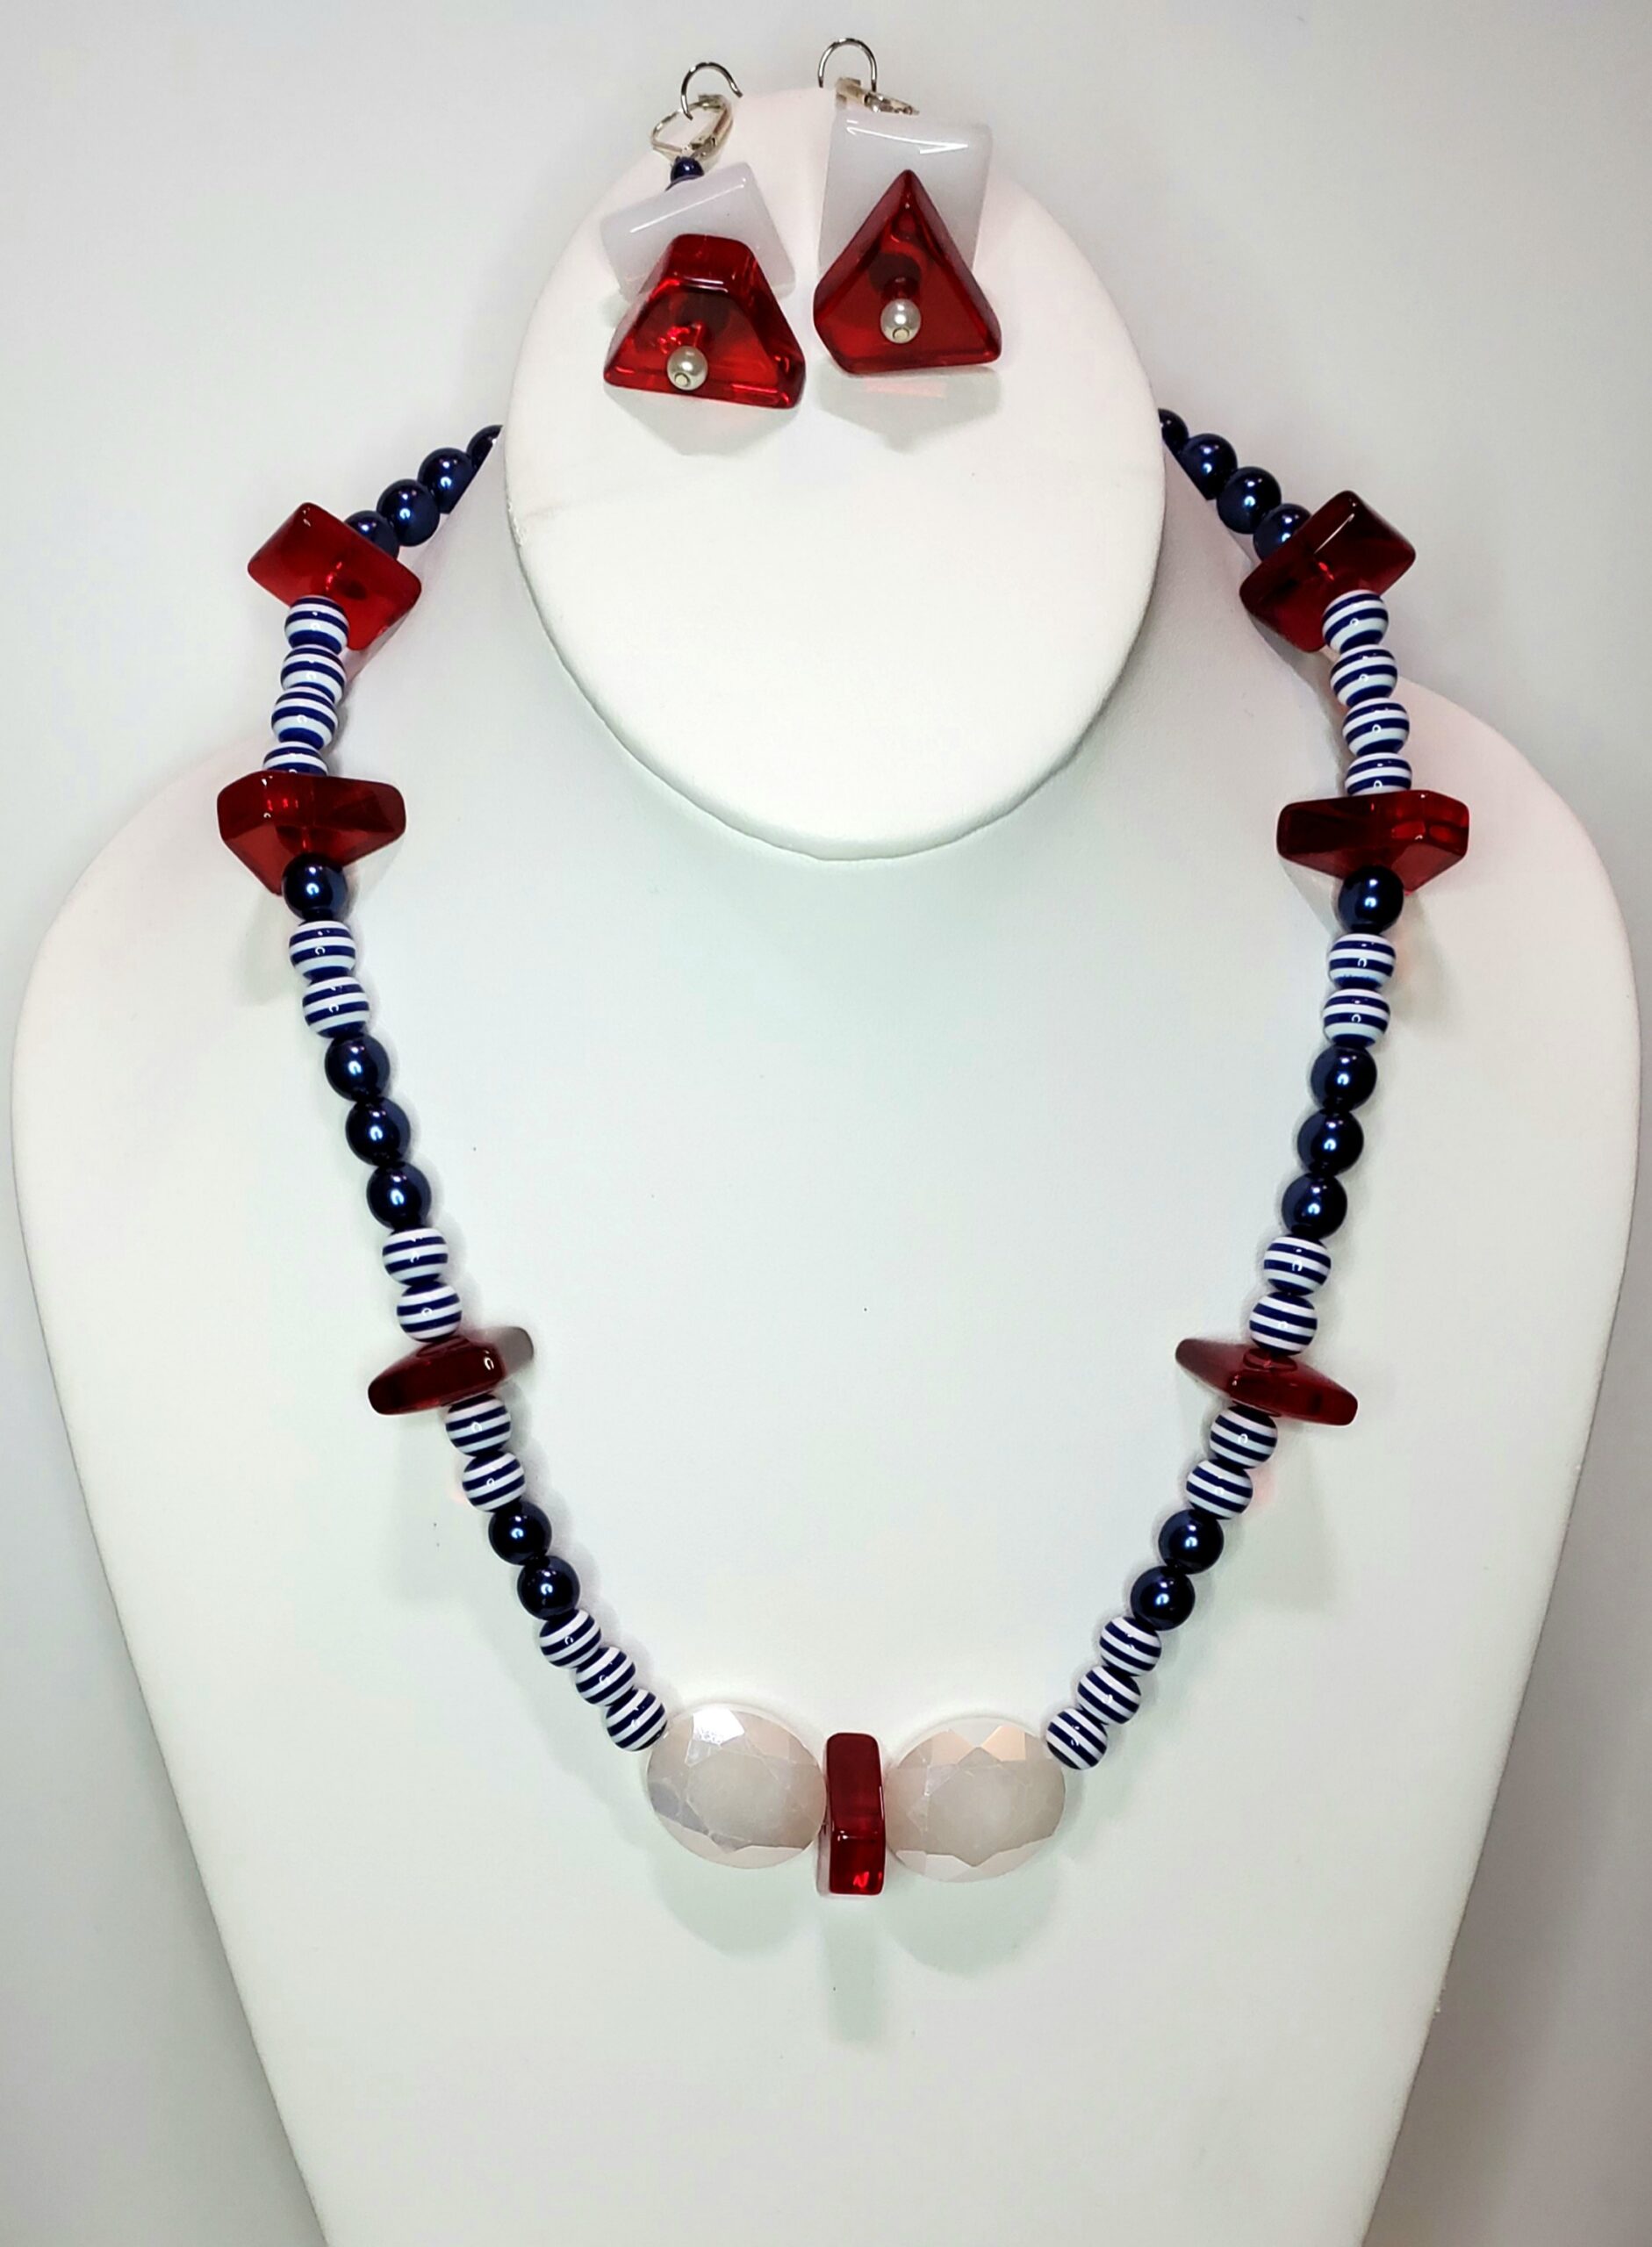 Spirit Beads By Fan-A-Peel - Red & White Bead Necklaces - Two Pack